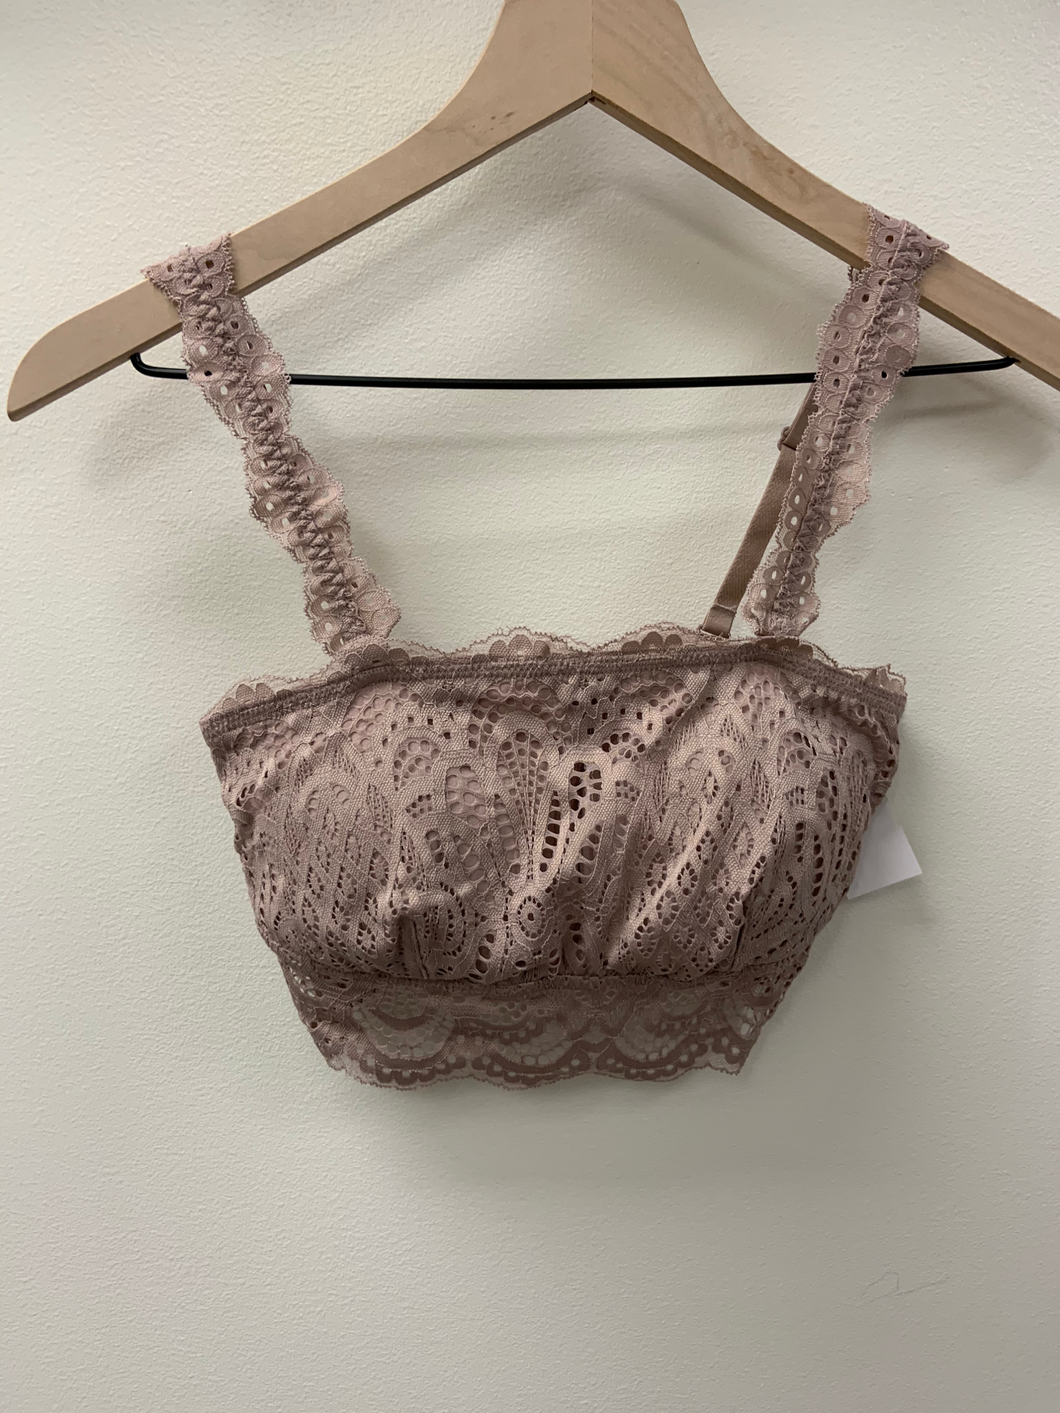 Maurices Bralette Size Small